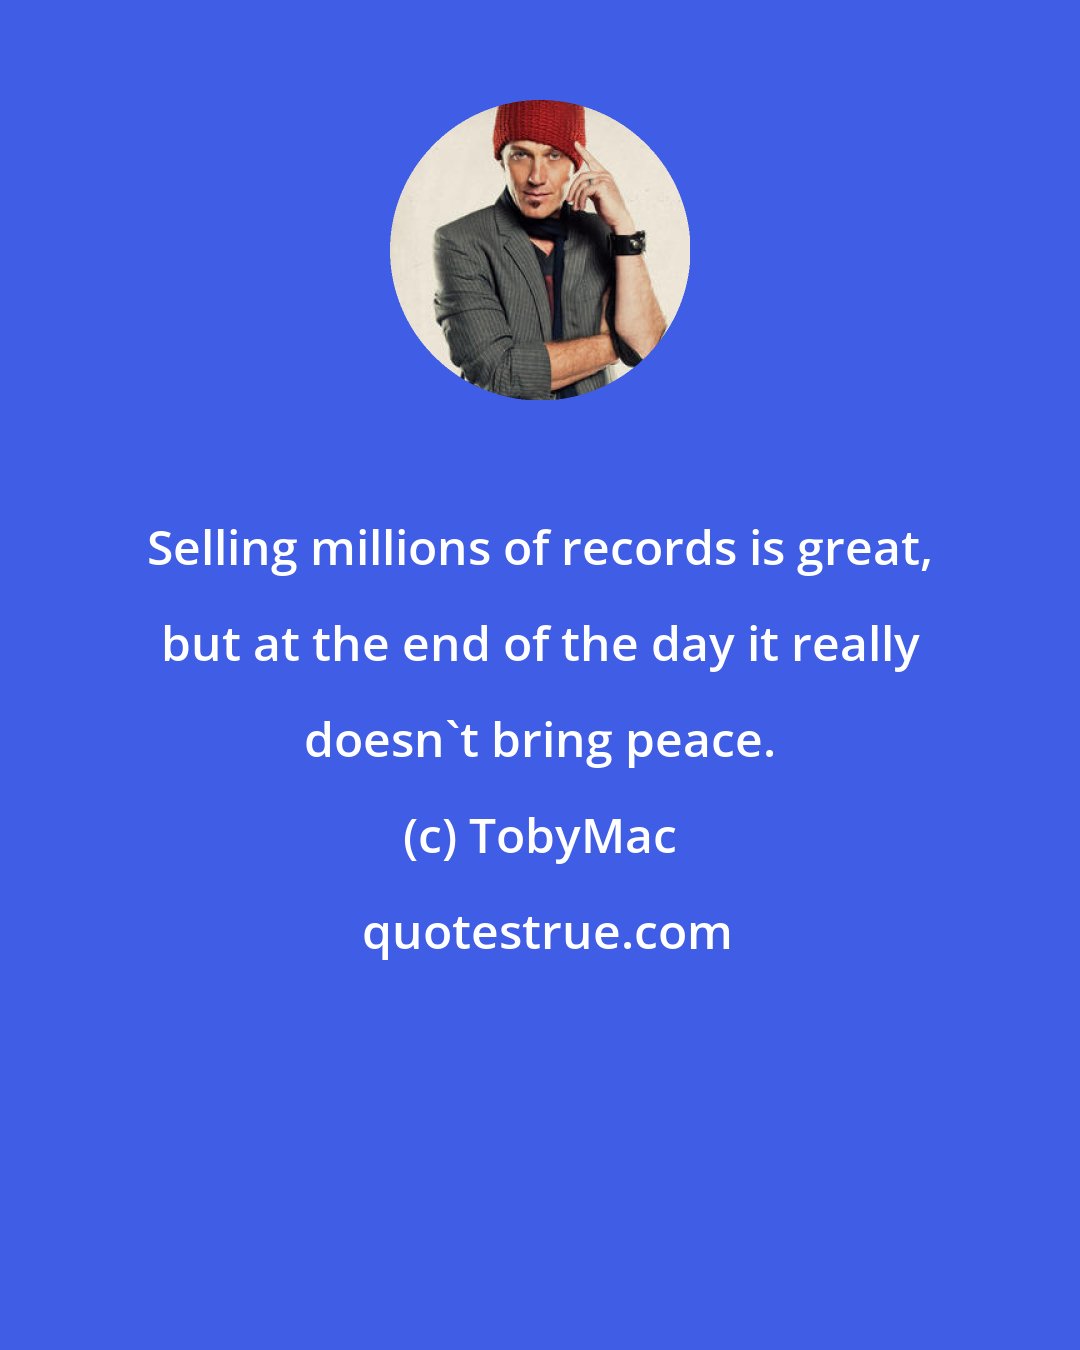 TobyMac: Selling millions of records is great, but at the end of the day it really doesn't bring peace.